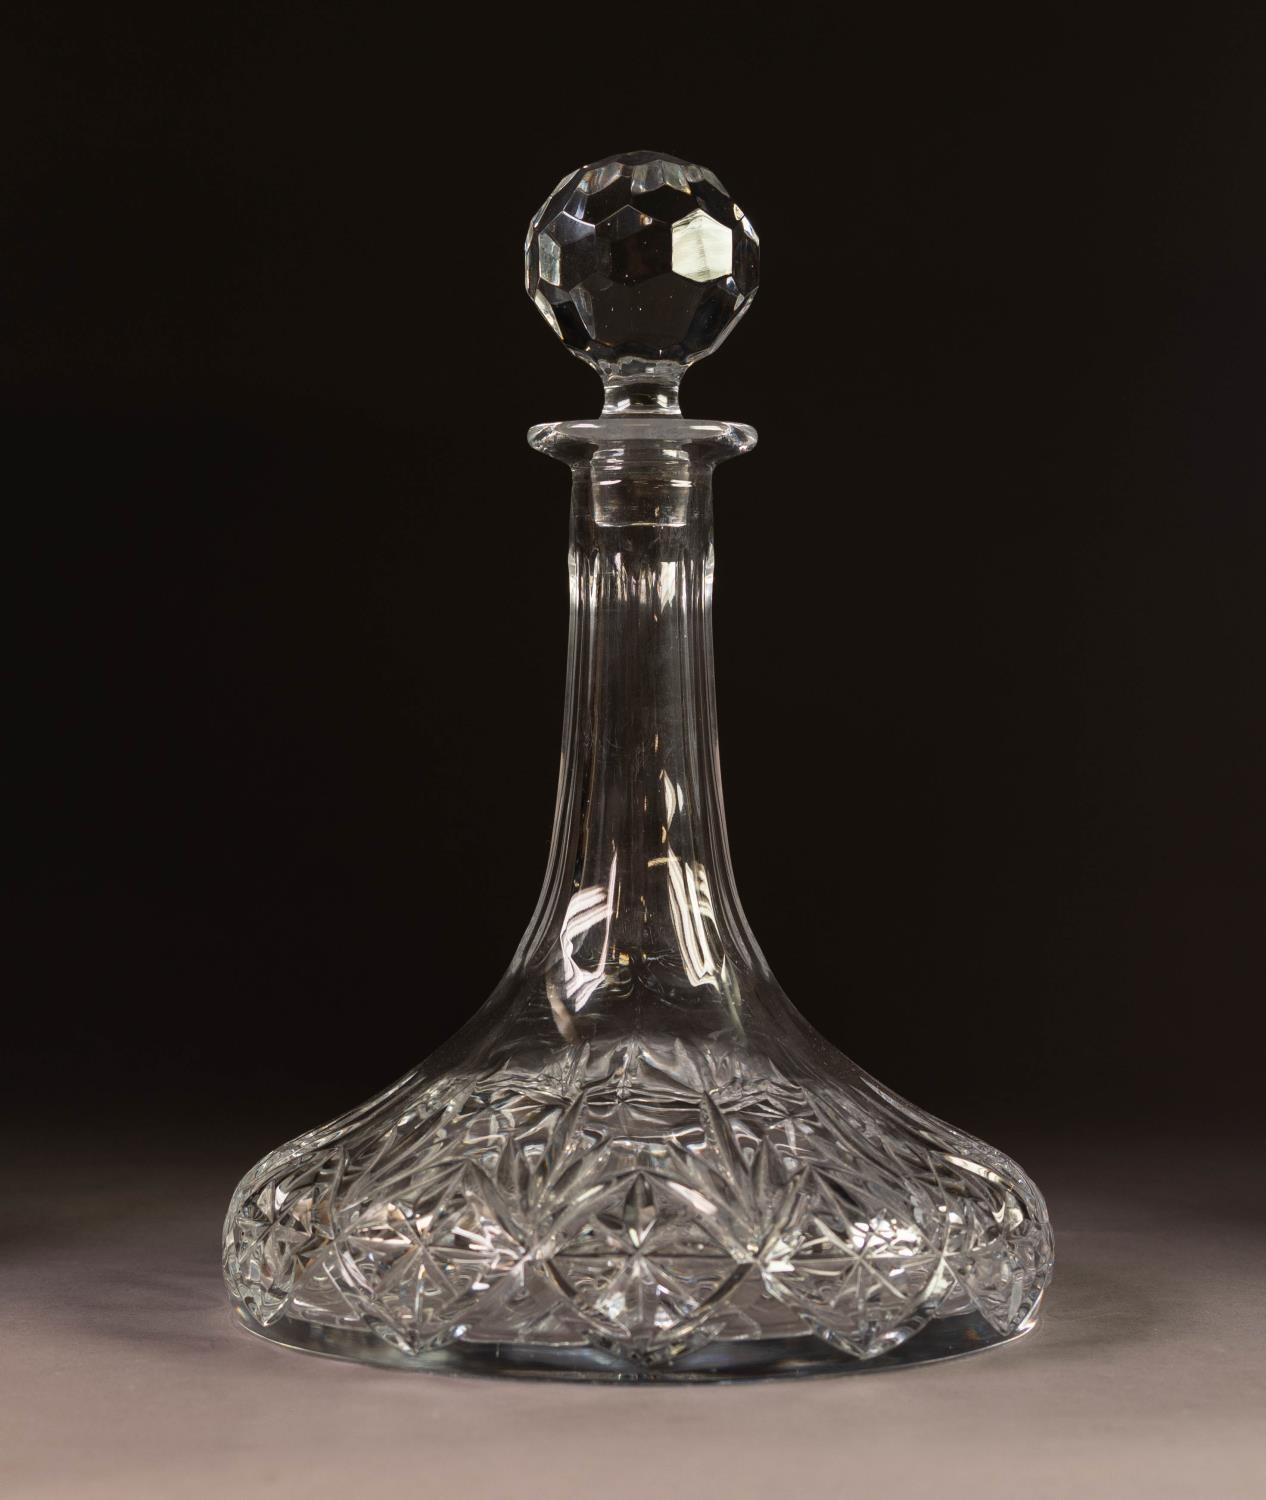 MODERN CUT GLASS SHIP?S DECANTER AND STOPPER, 11 ¼? (28.6cm) high, unmarked